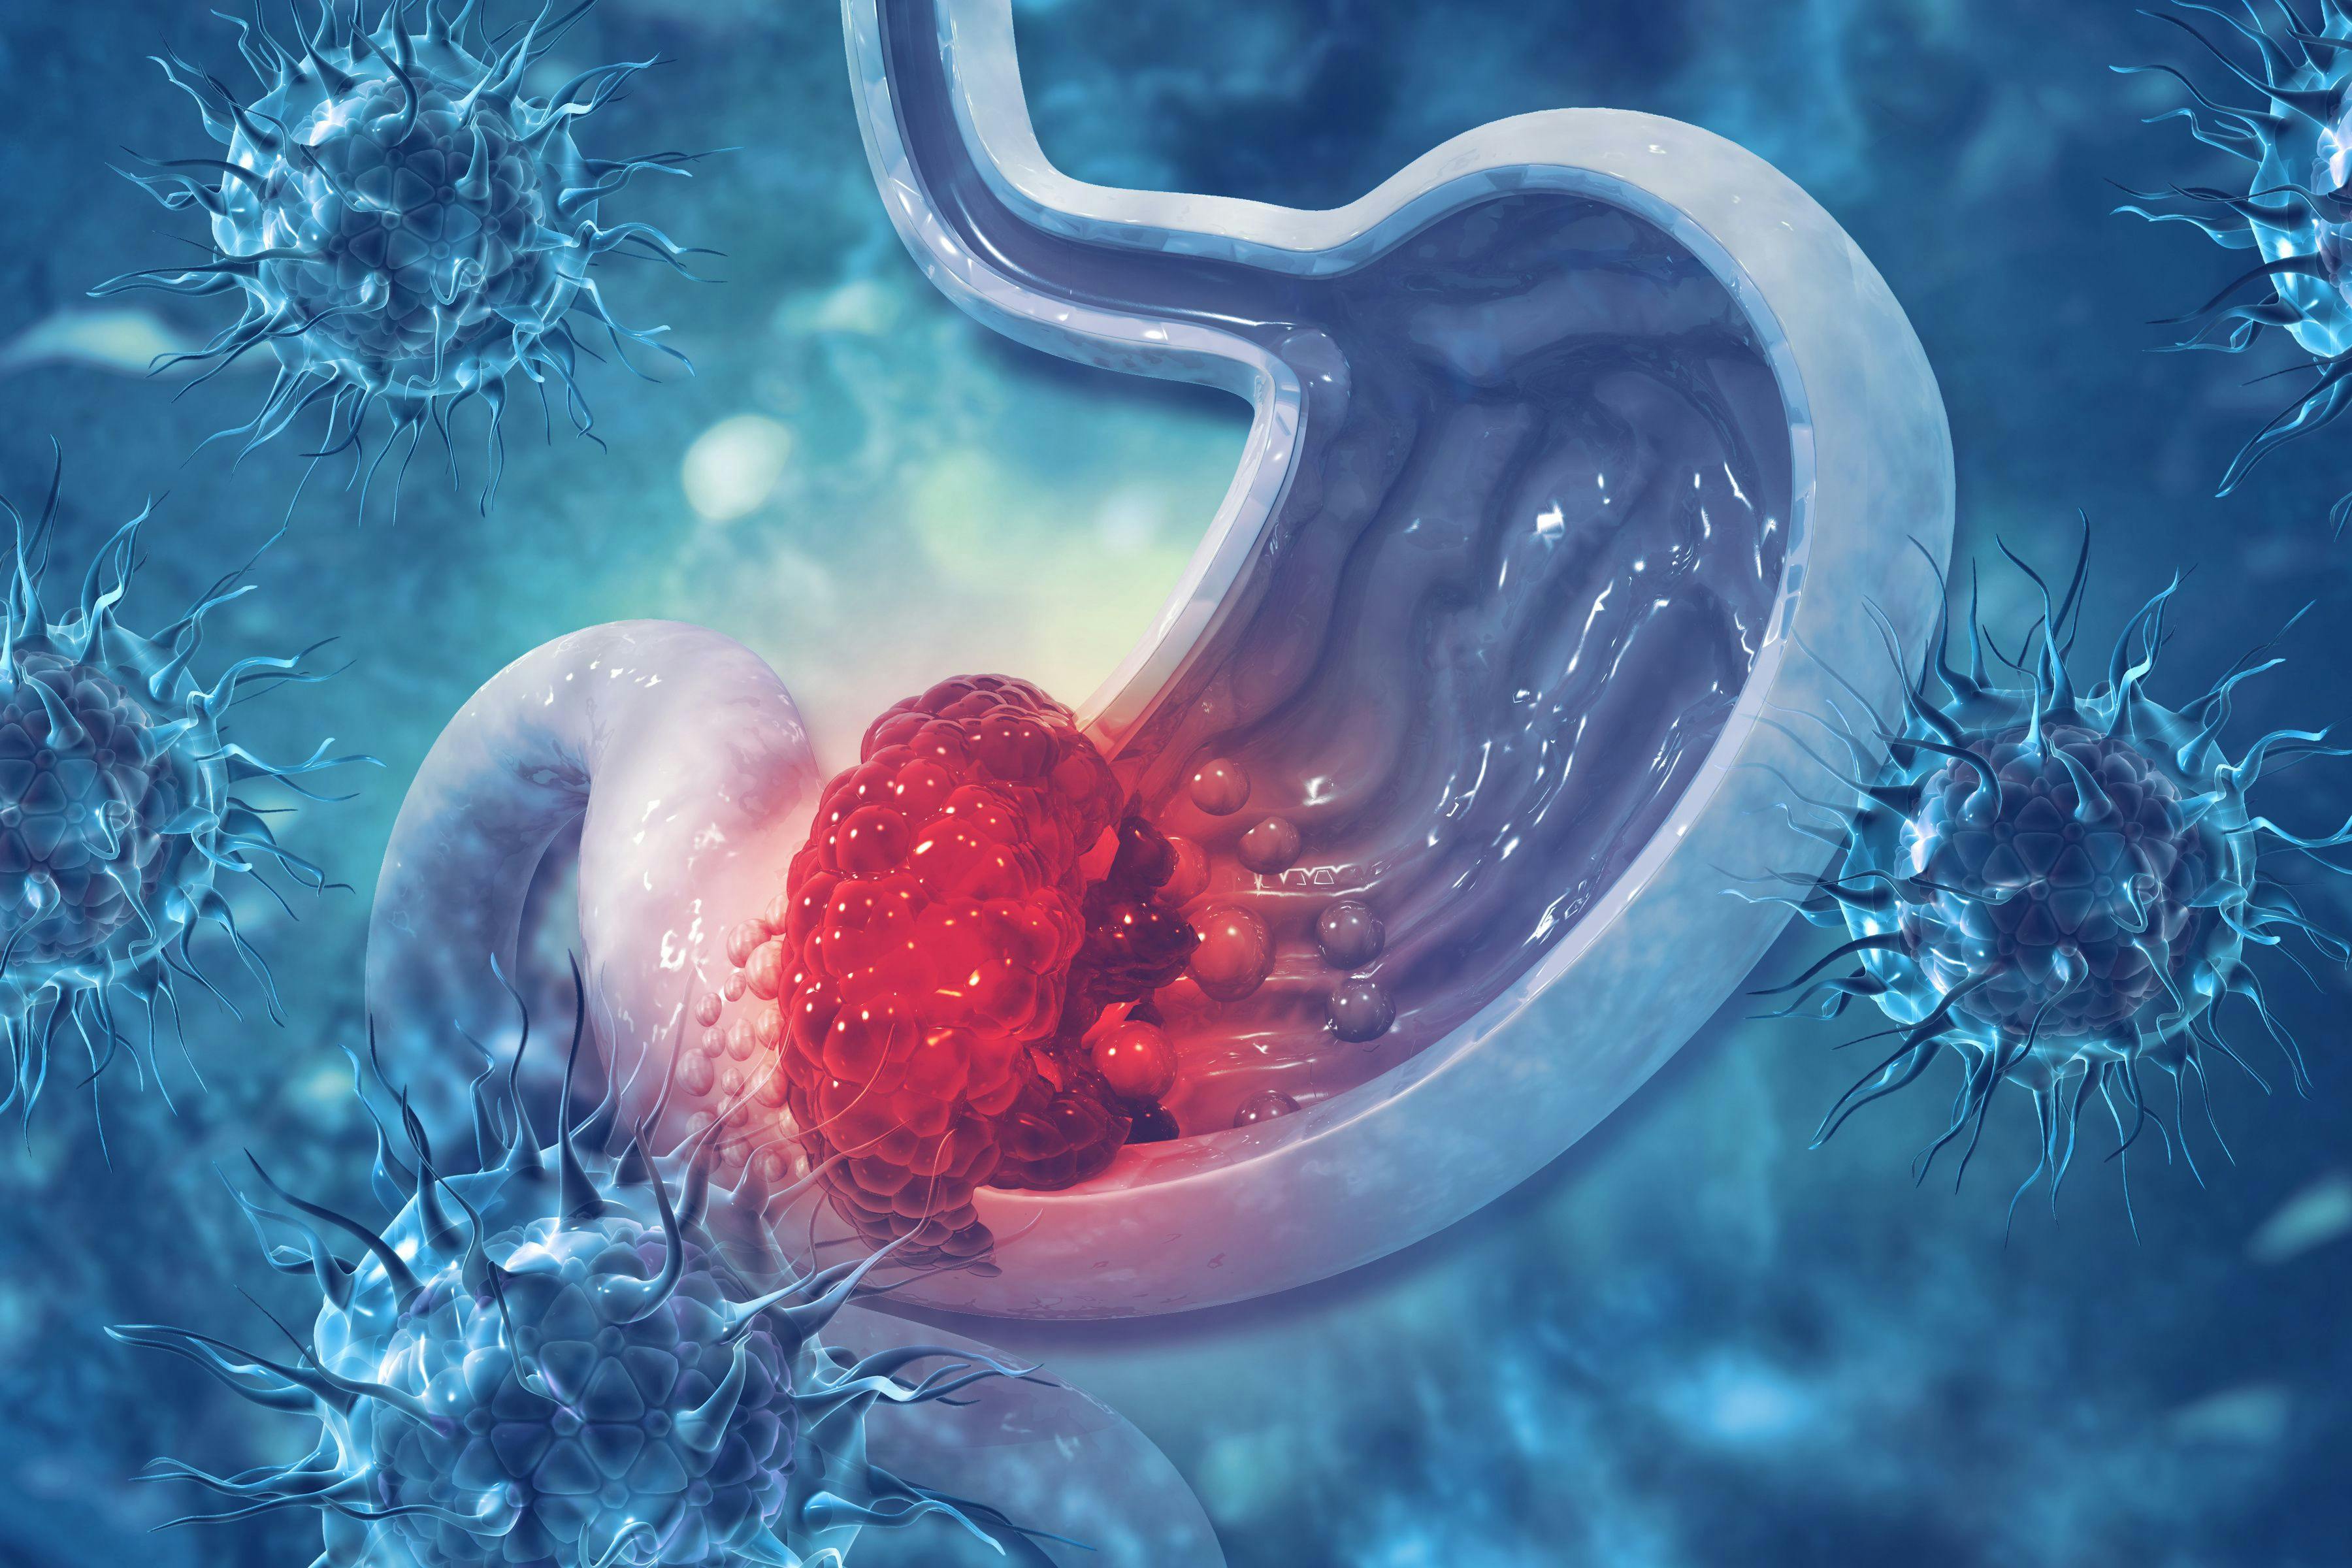 Stomach cancer. Cancer attacking cell. Stomach disease concept: © Crystal Light - stock.adobe.com


